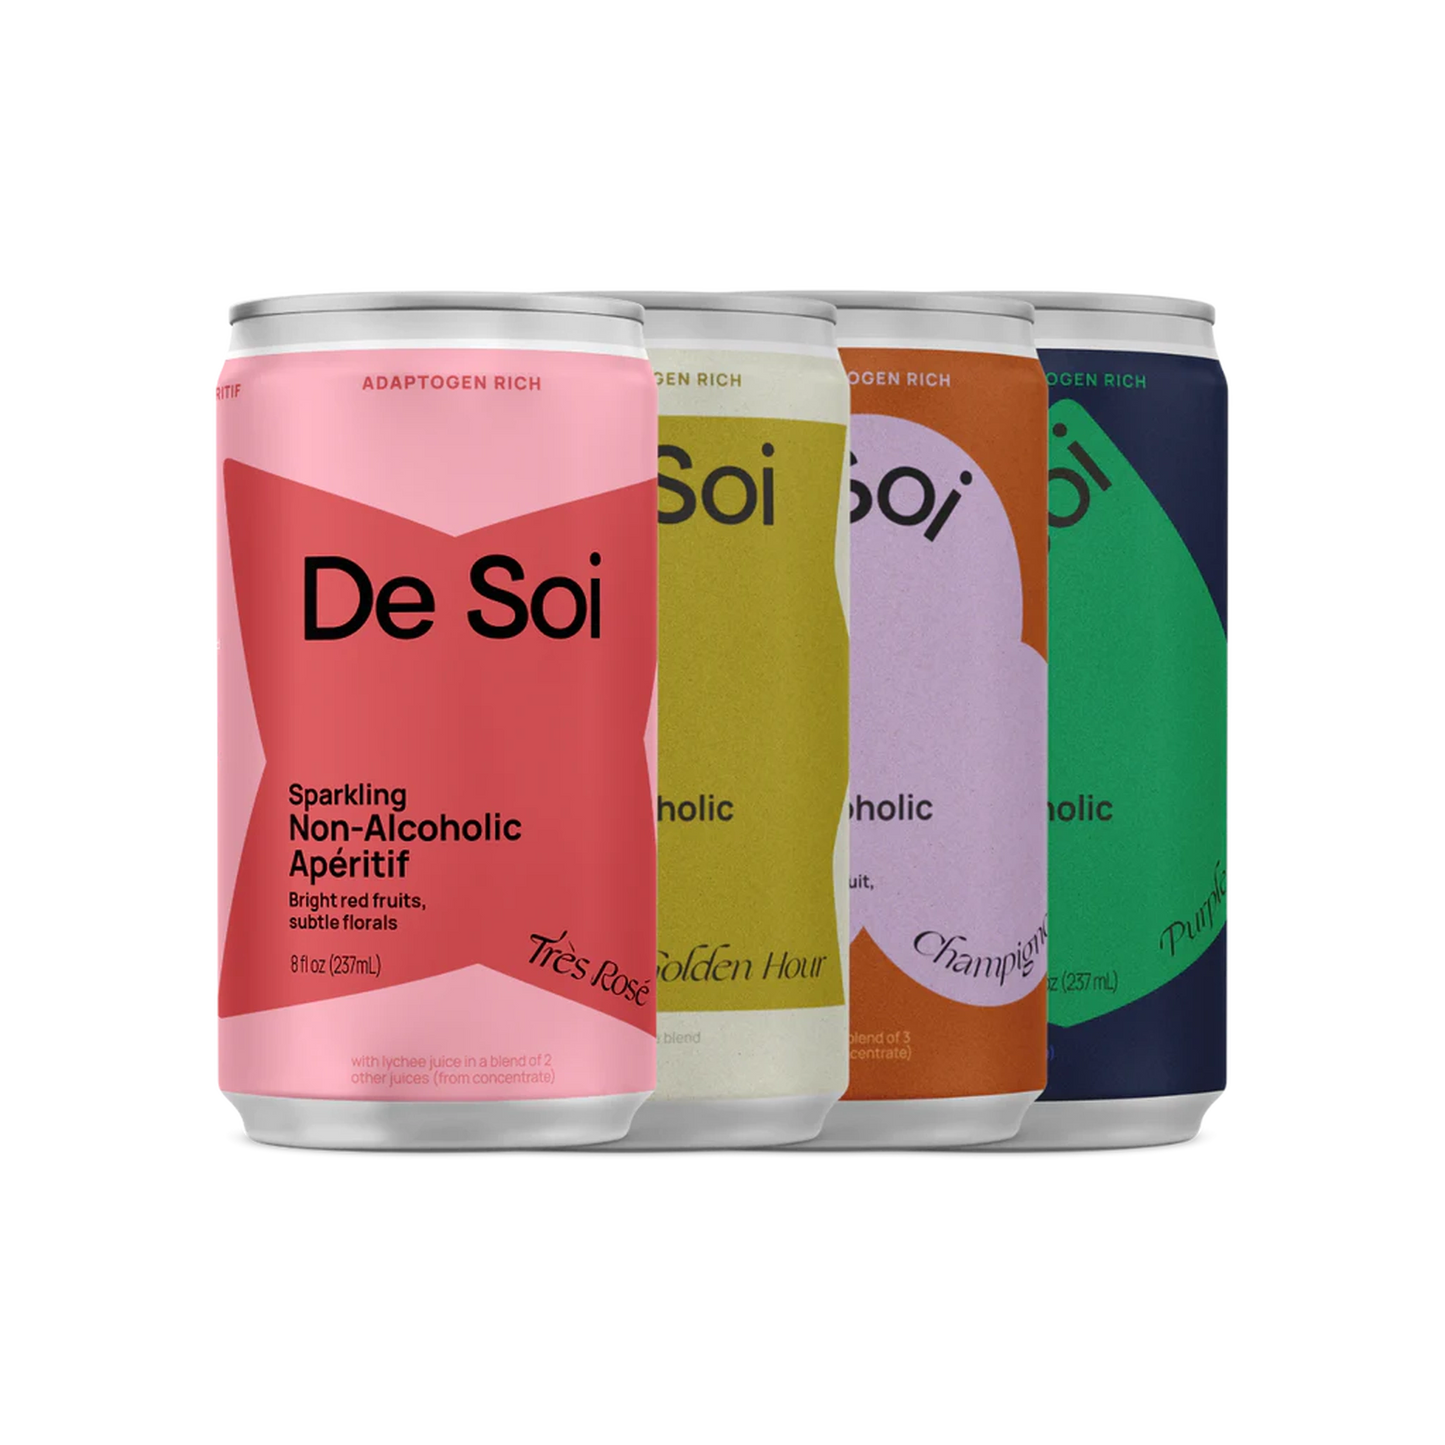 De Soi Sparkling Non Alcoholic Aperitif Adaptogenic Alcohol Free Beverage Available at The Sobr Market in Winnipeg - Free Delivery and Shipping Canada Wide